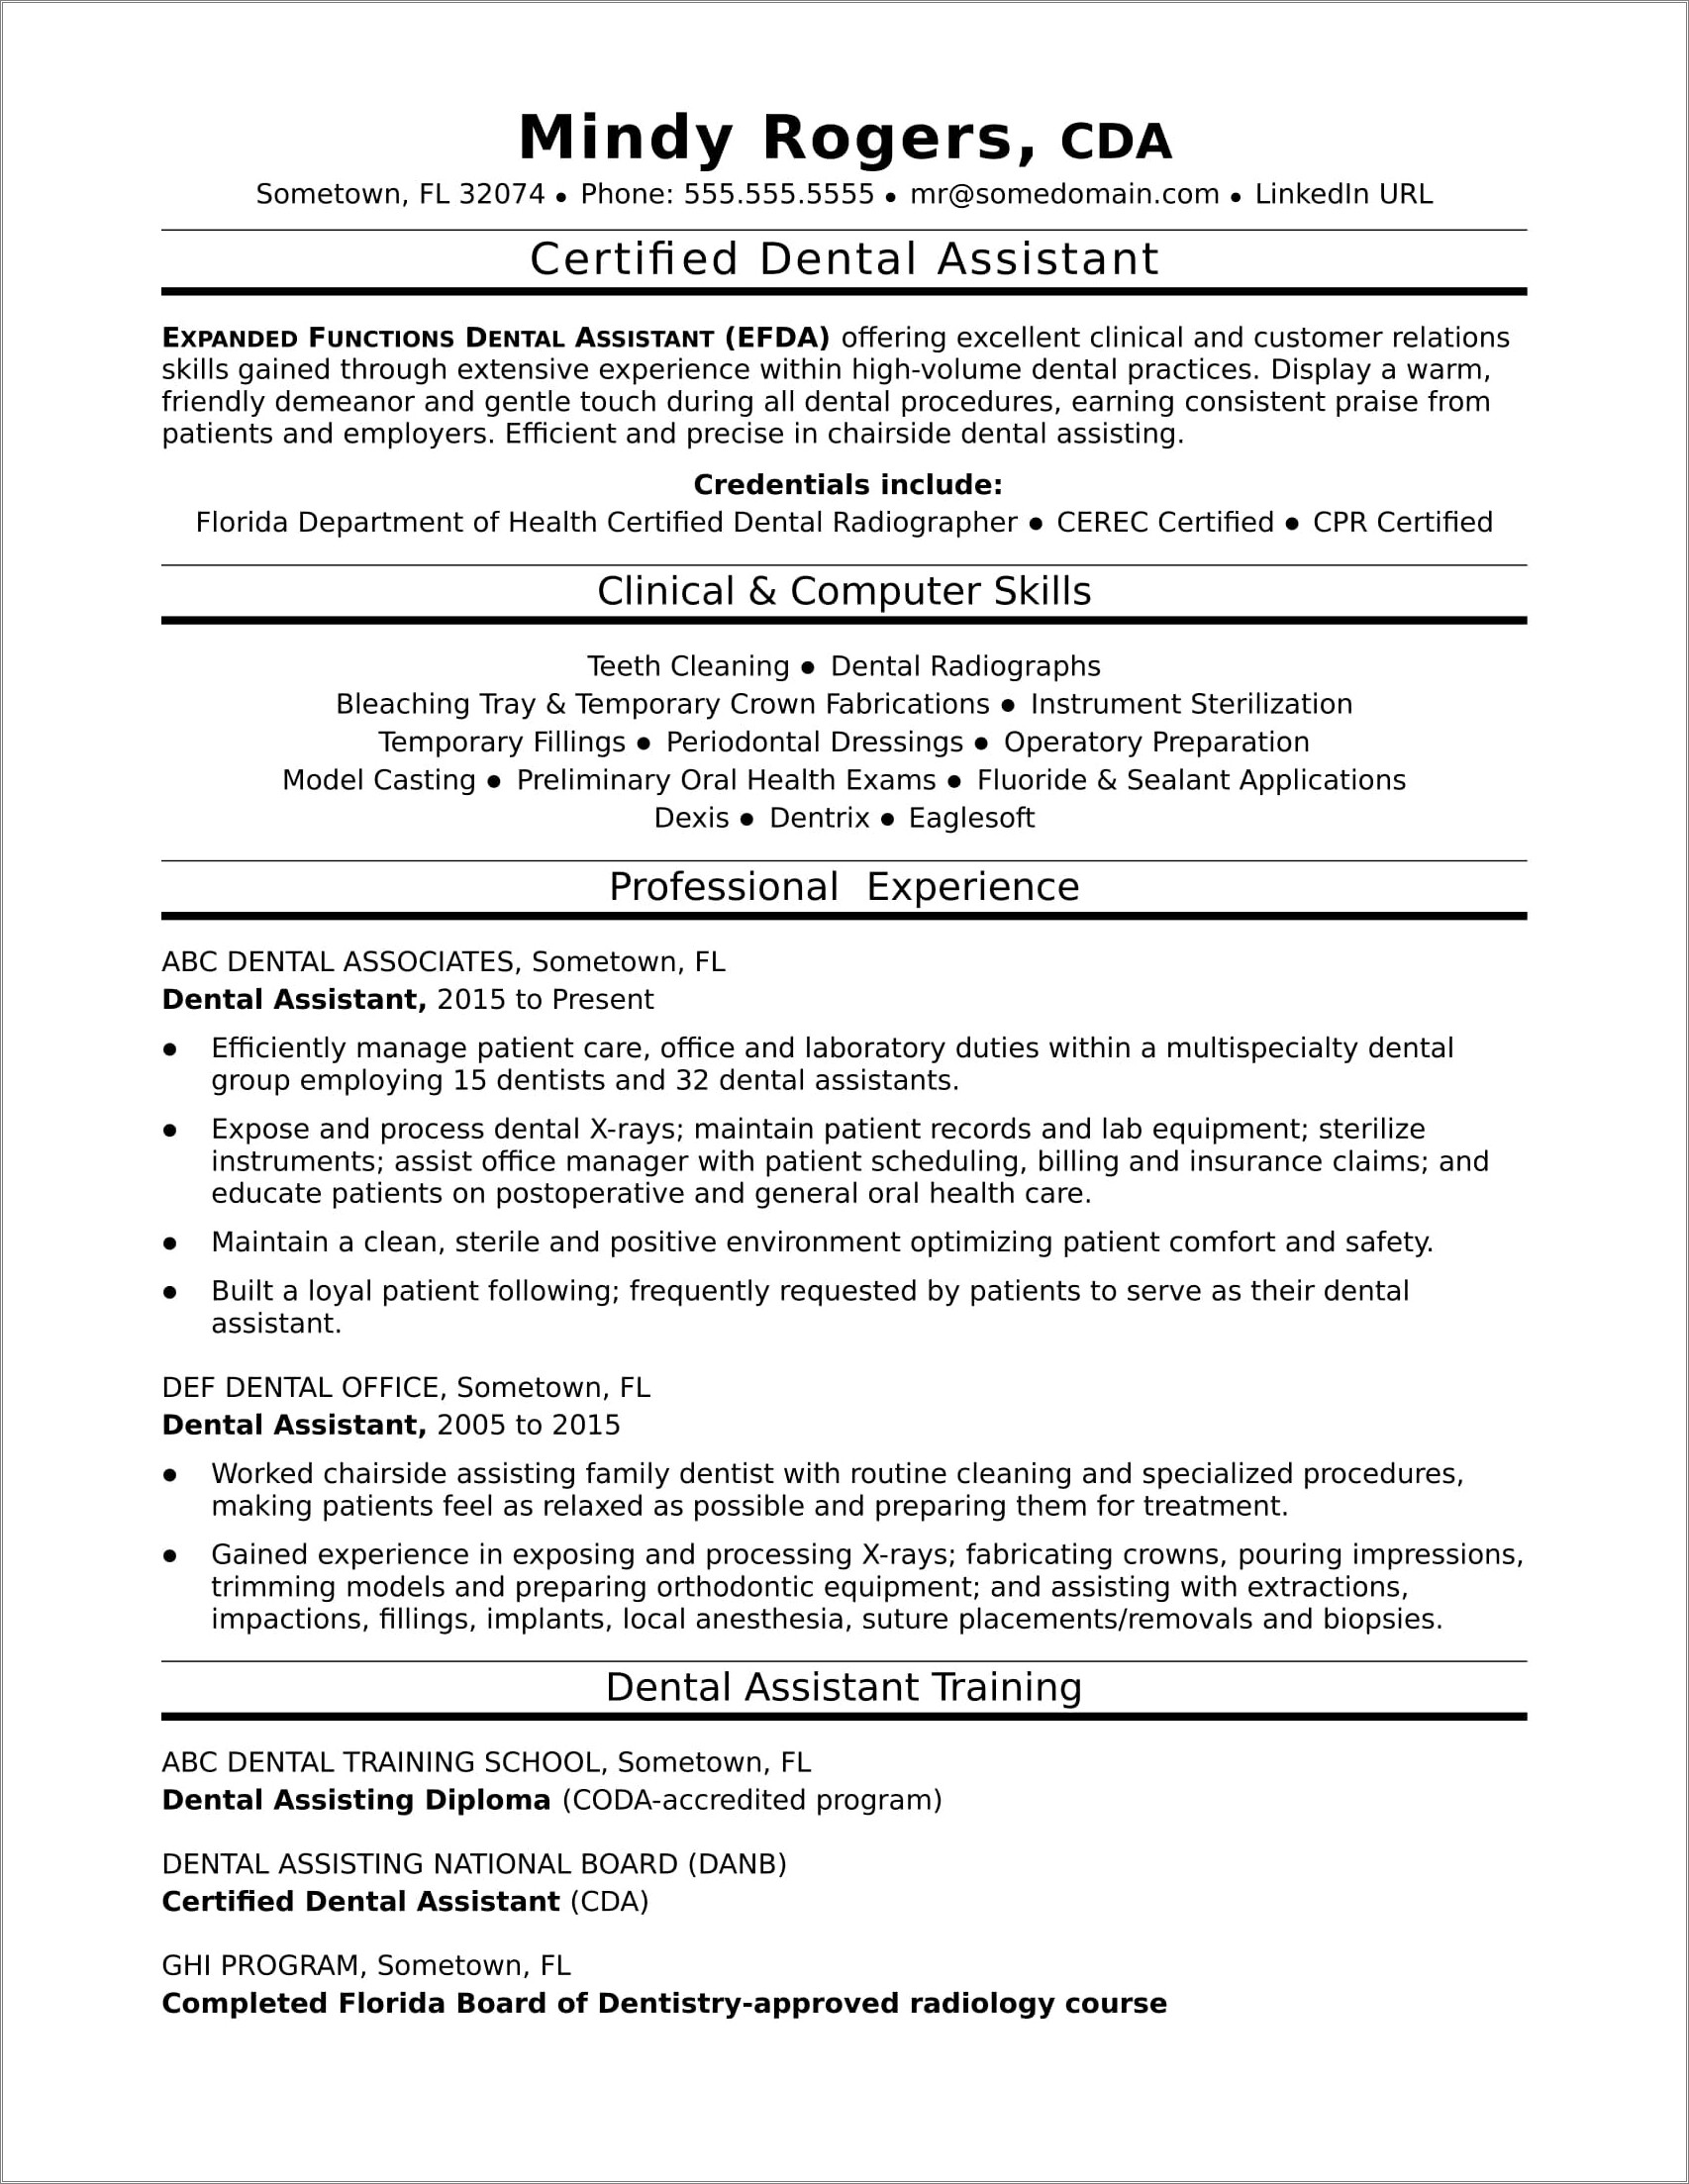 Professional Summary For A Dental Resume